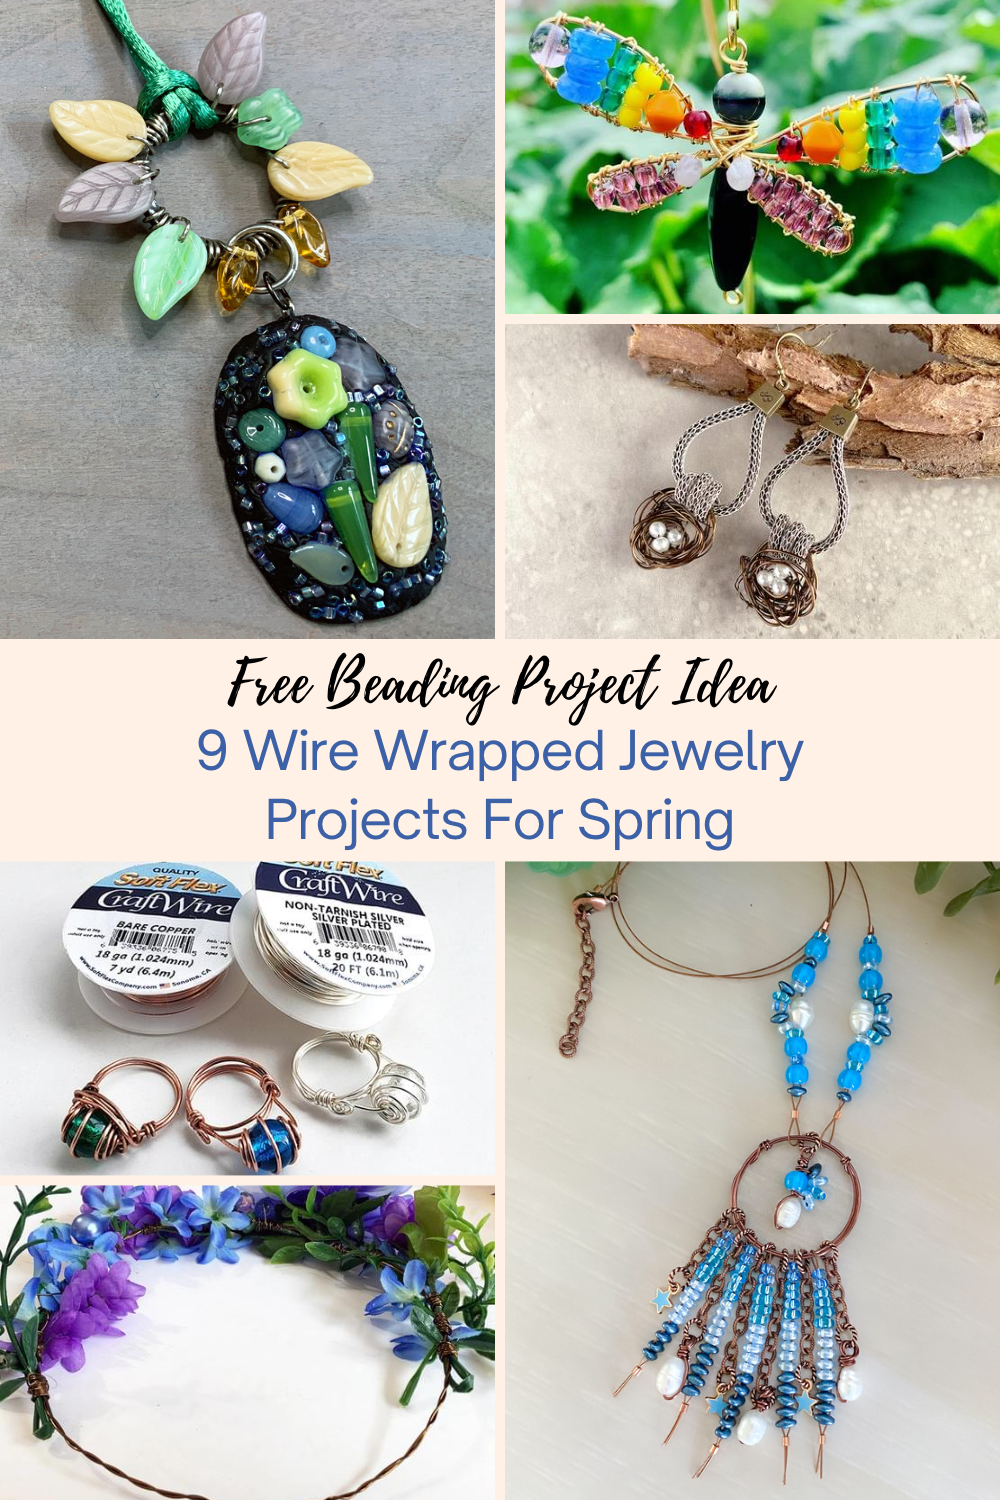 9 Wire Wrapped Jewelry Projects For Spring Collage